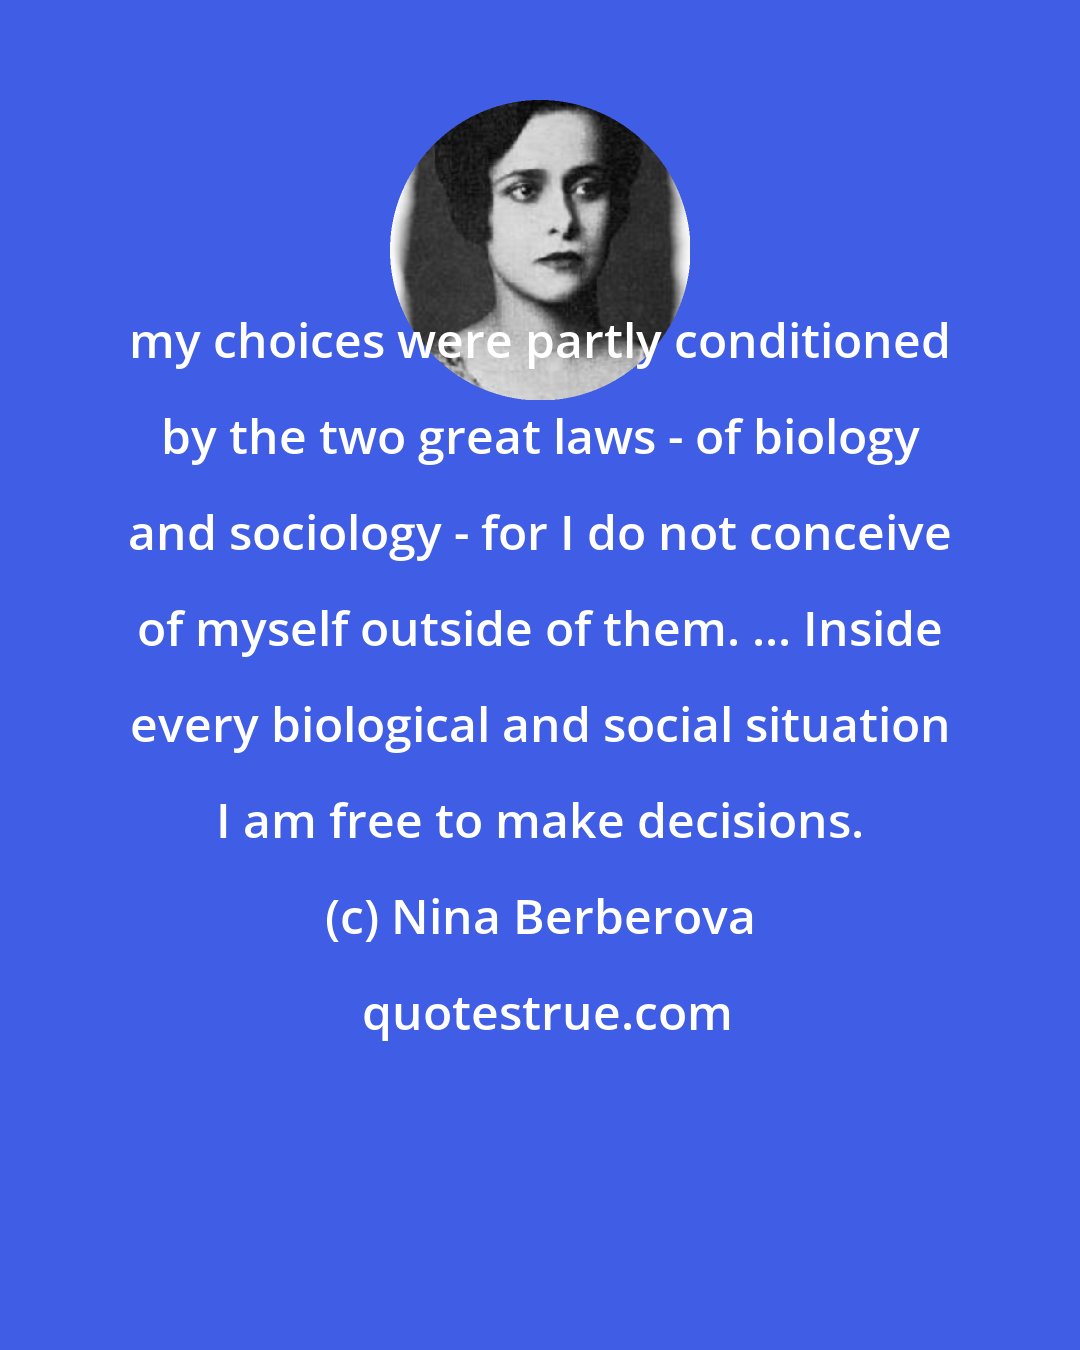 Nina Berberova: my choices were partly conditioned by the two great laws - of biology and sociology - for I do not conceive of myself outside of them. ... Inside every biological and social situation I am free to make decisions.